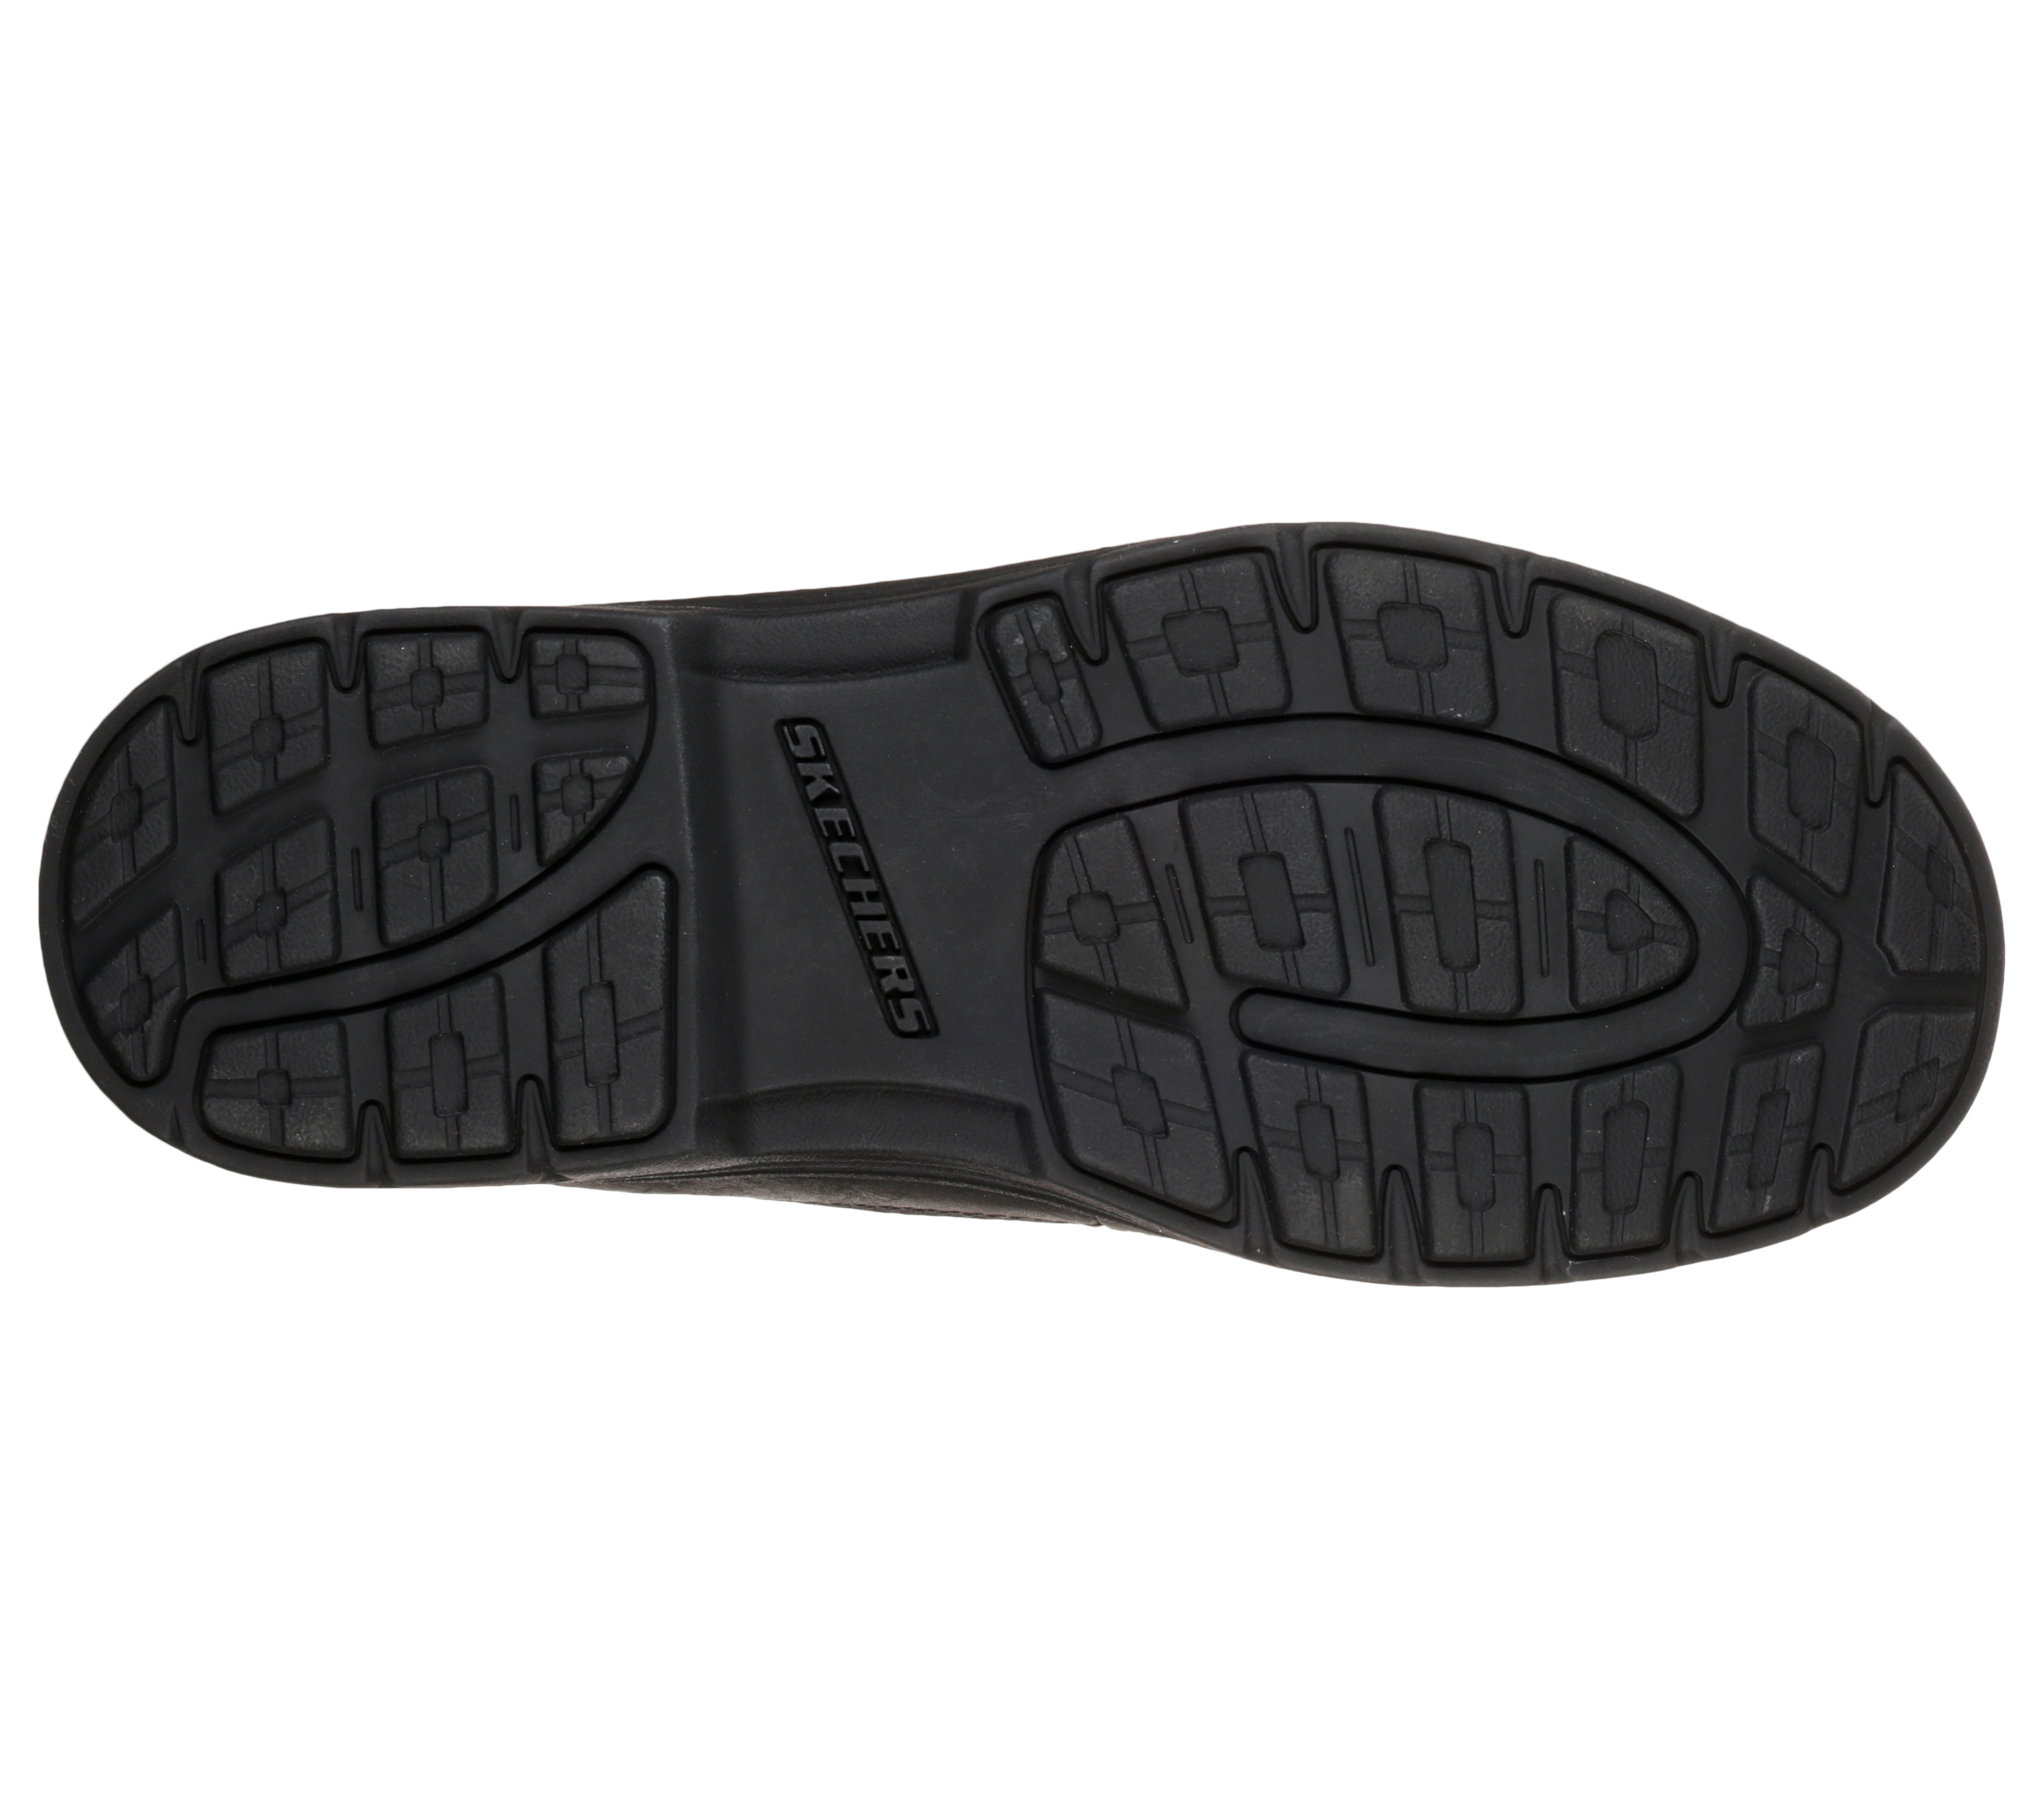 skechers relaxed fit segment boot